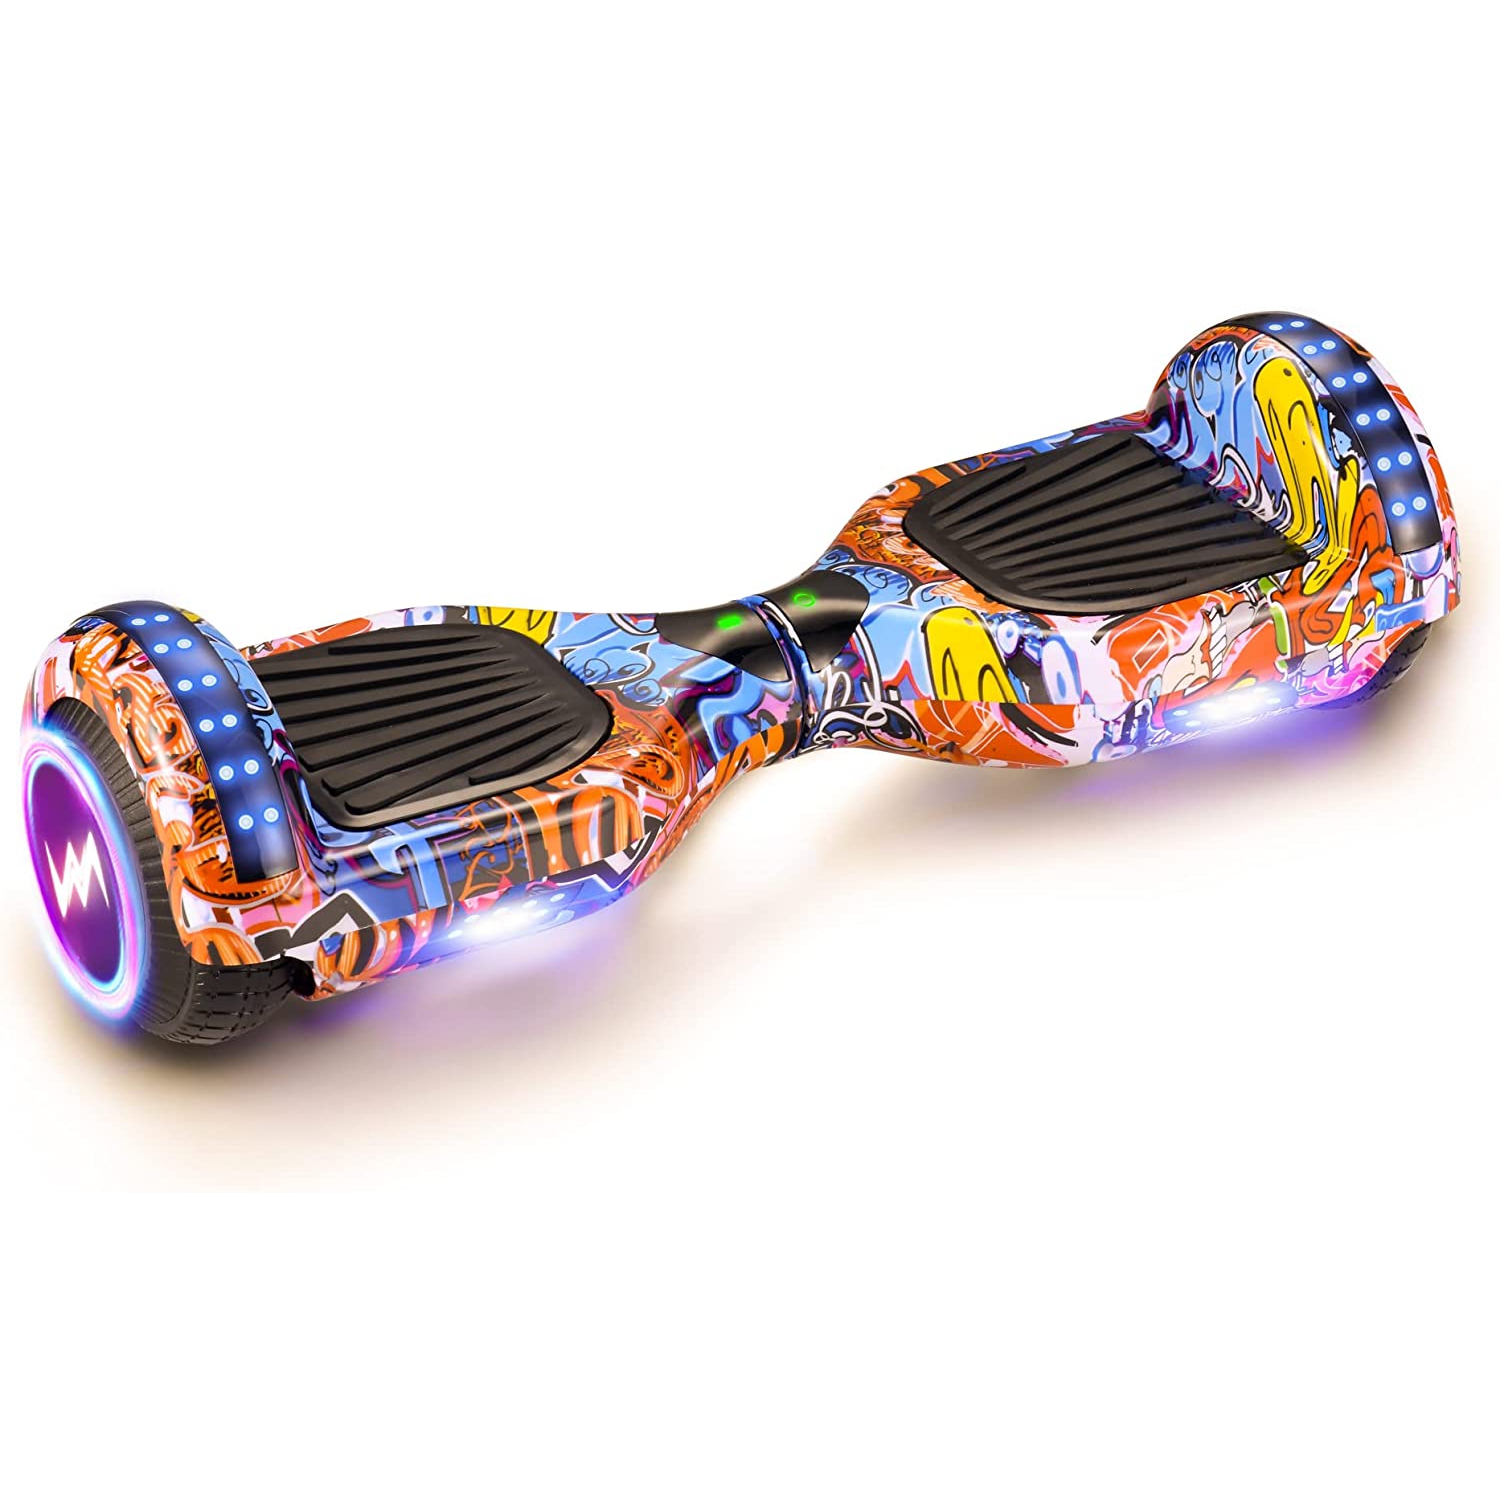 WEELMOTION Hiphop Orange Hoverboard with Music Speaker and LED Front & Strap Lights All Terrain 6.5" UL 2272 Certified Hoverboard with complimentary hover board bag